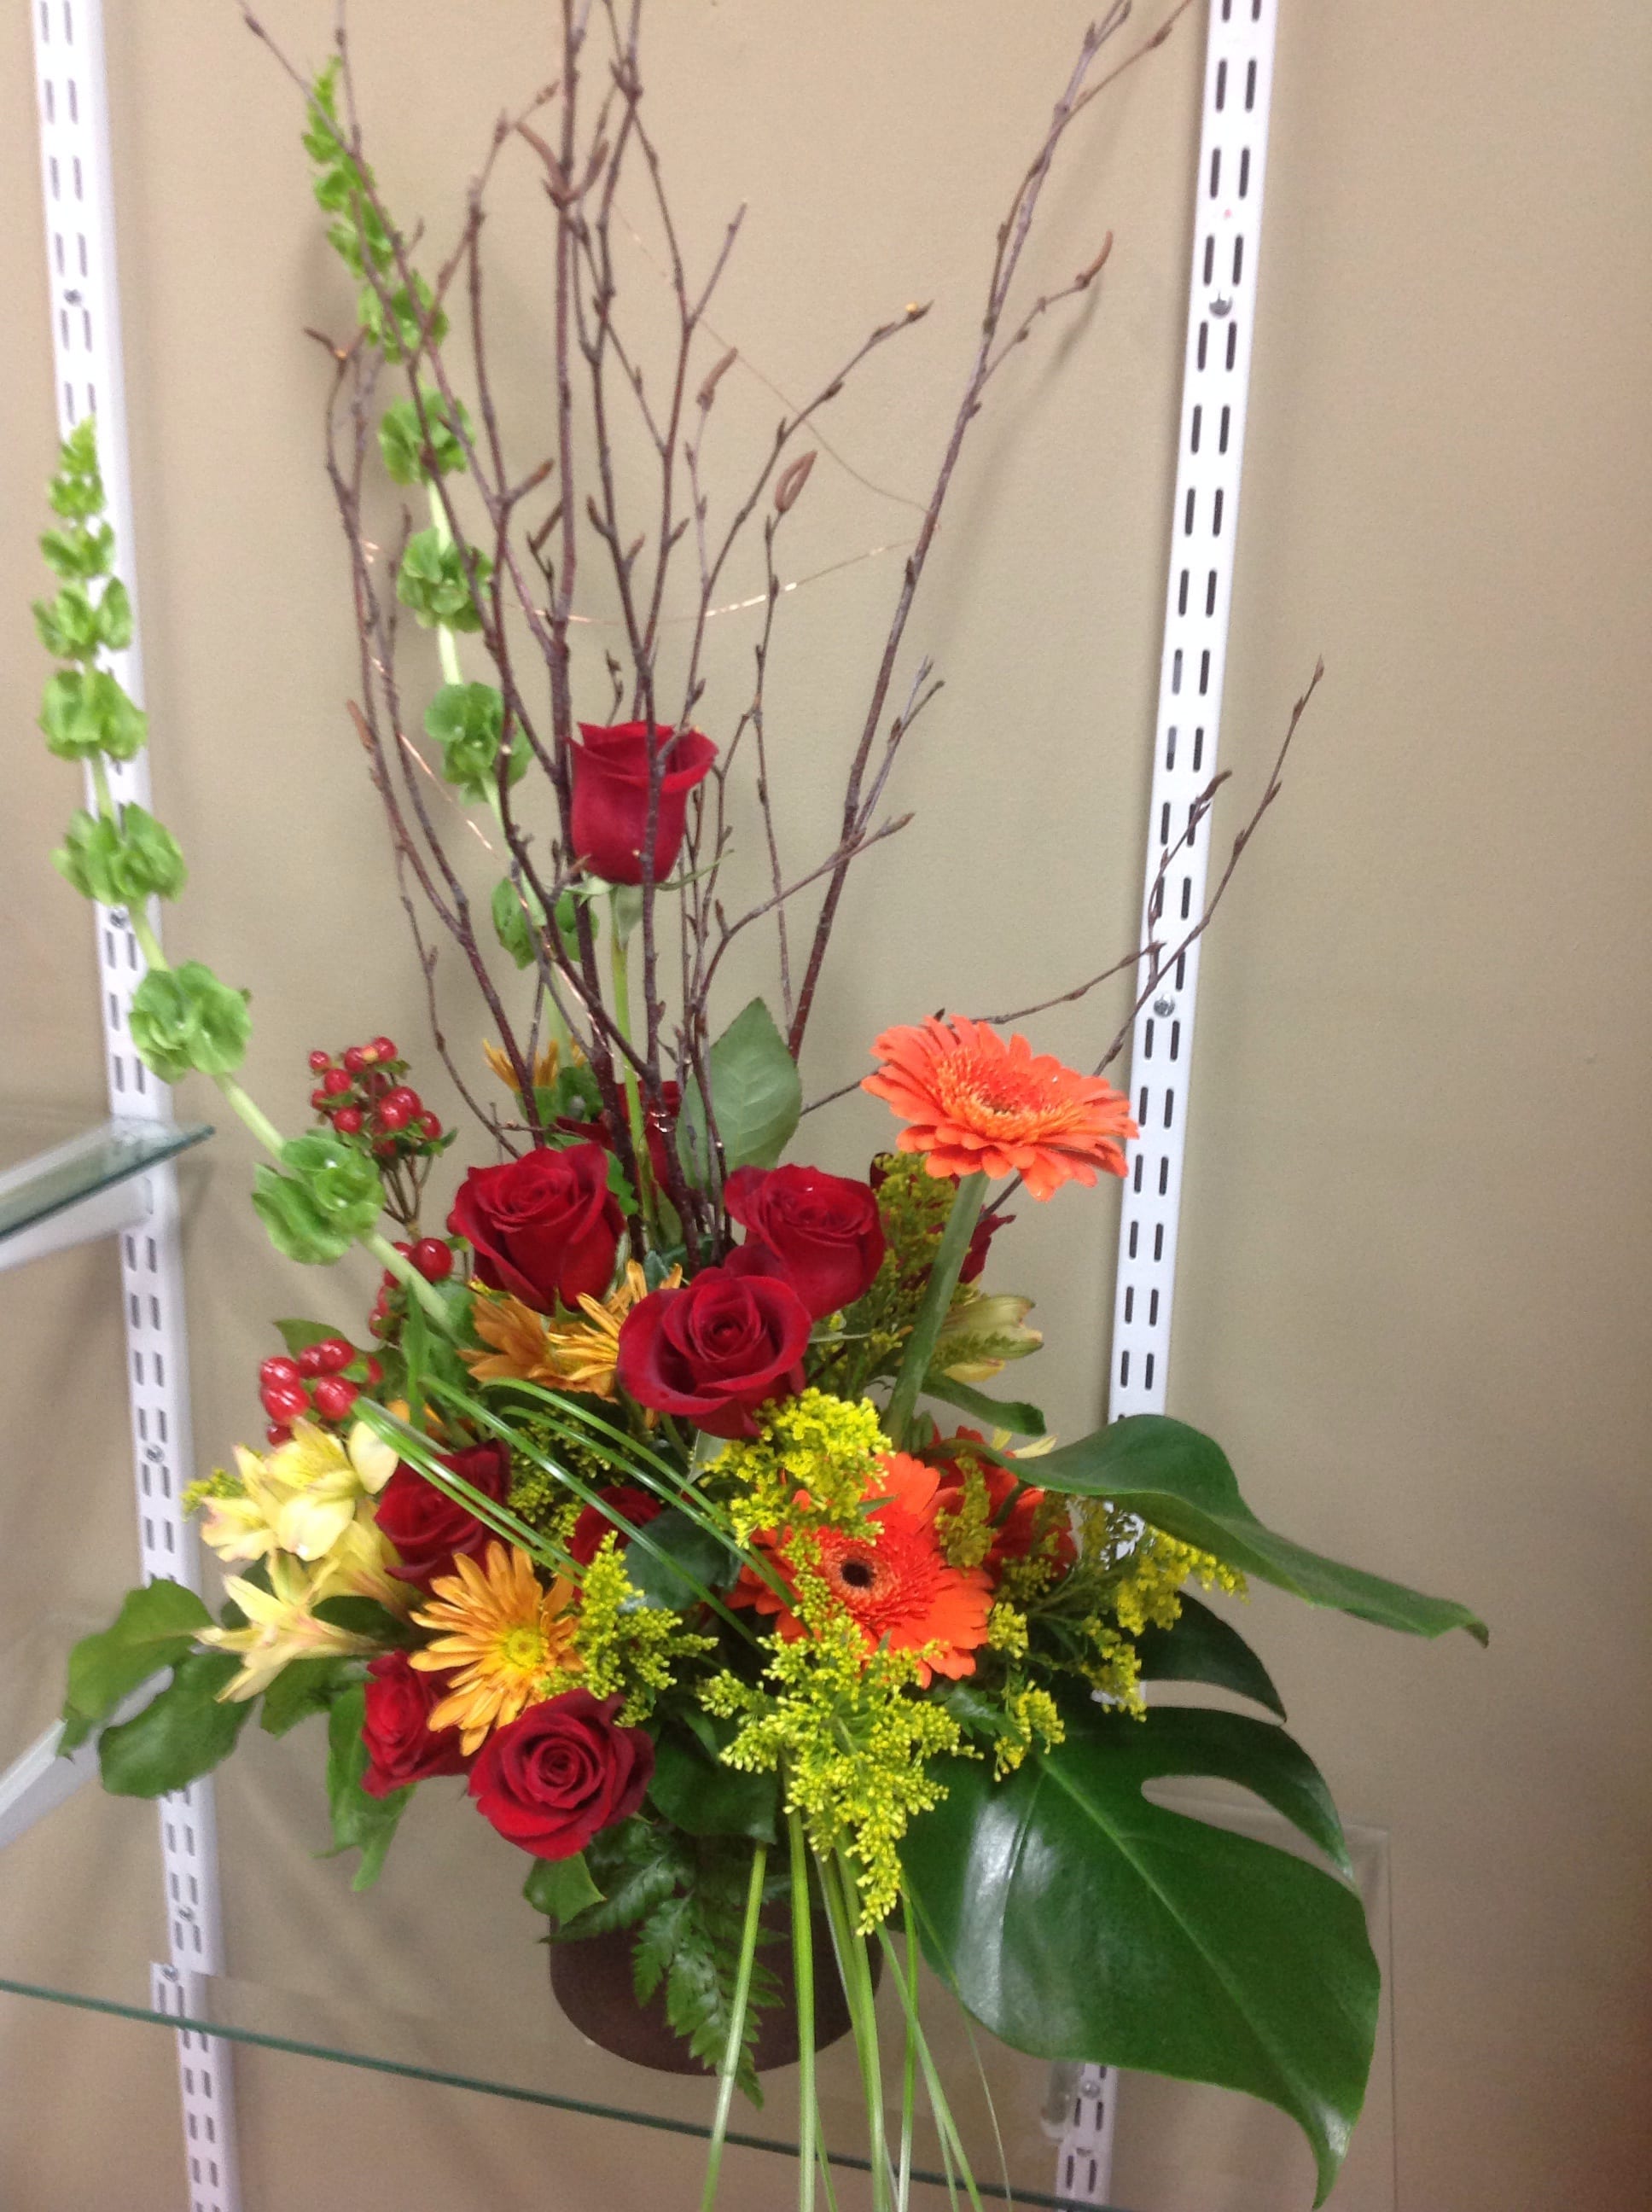 Taste of the woods - Fall colored arrangement